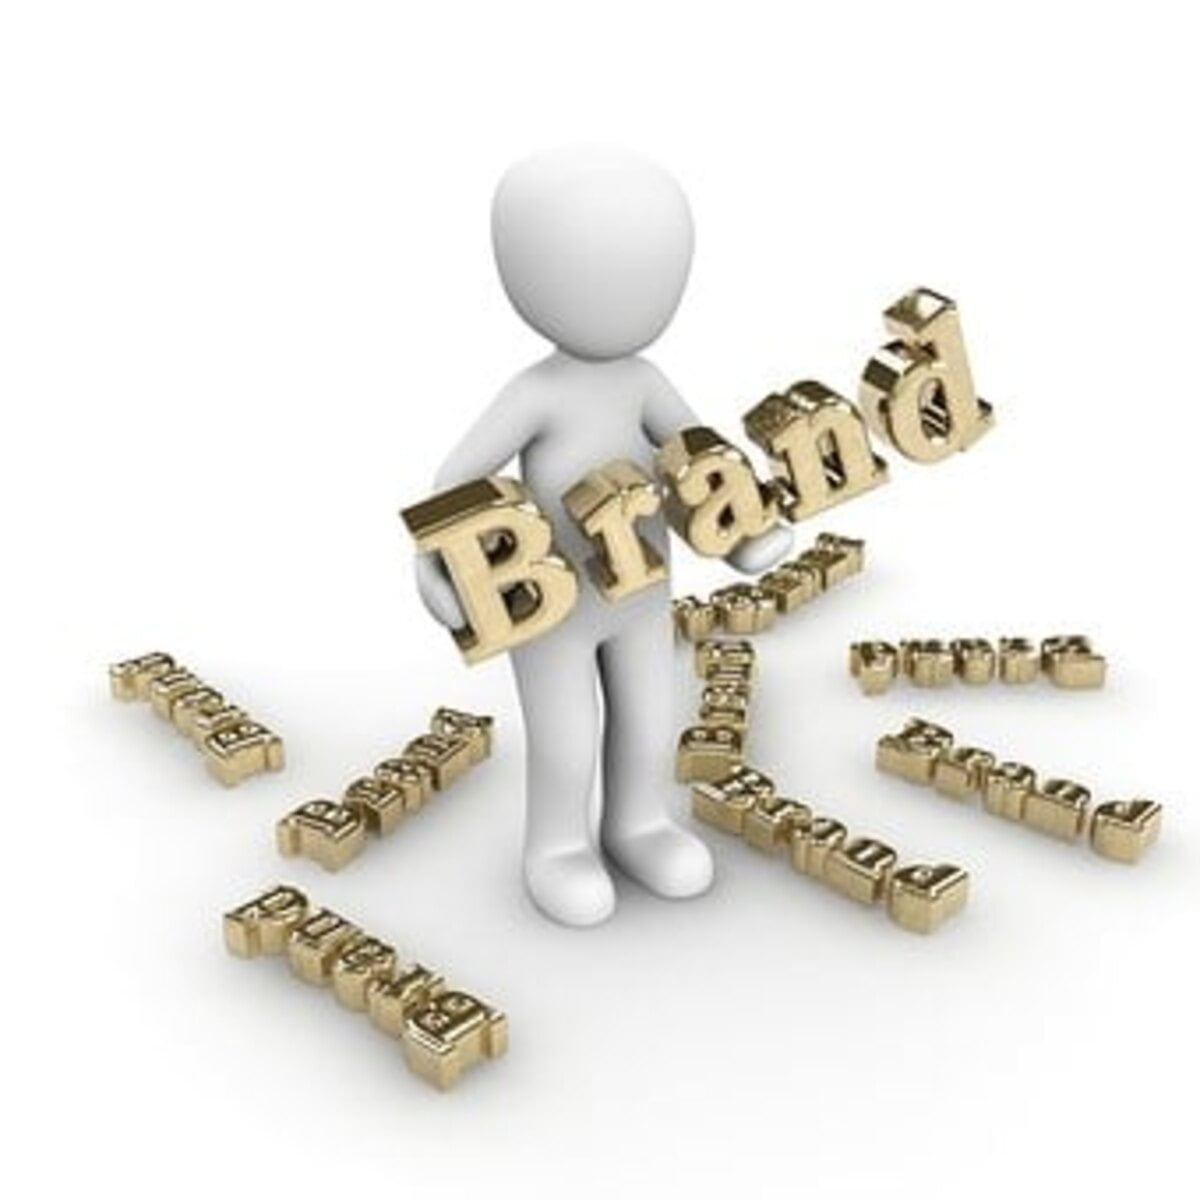 How to Deal With a Brand Identity Crisis